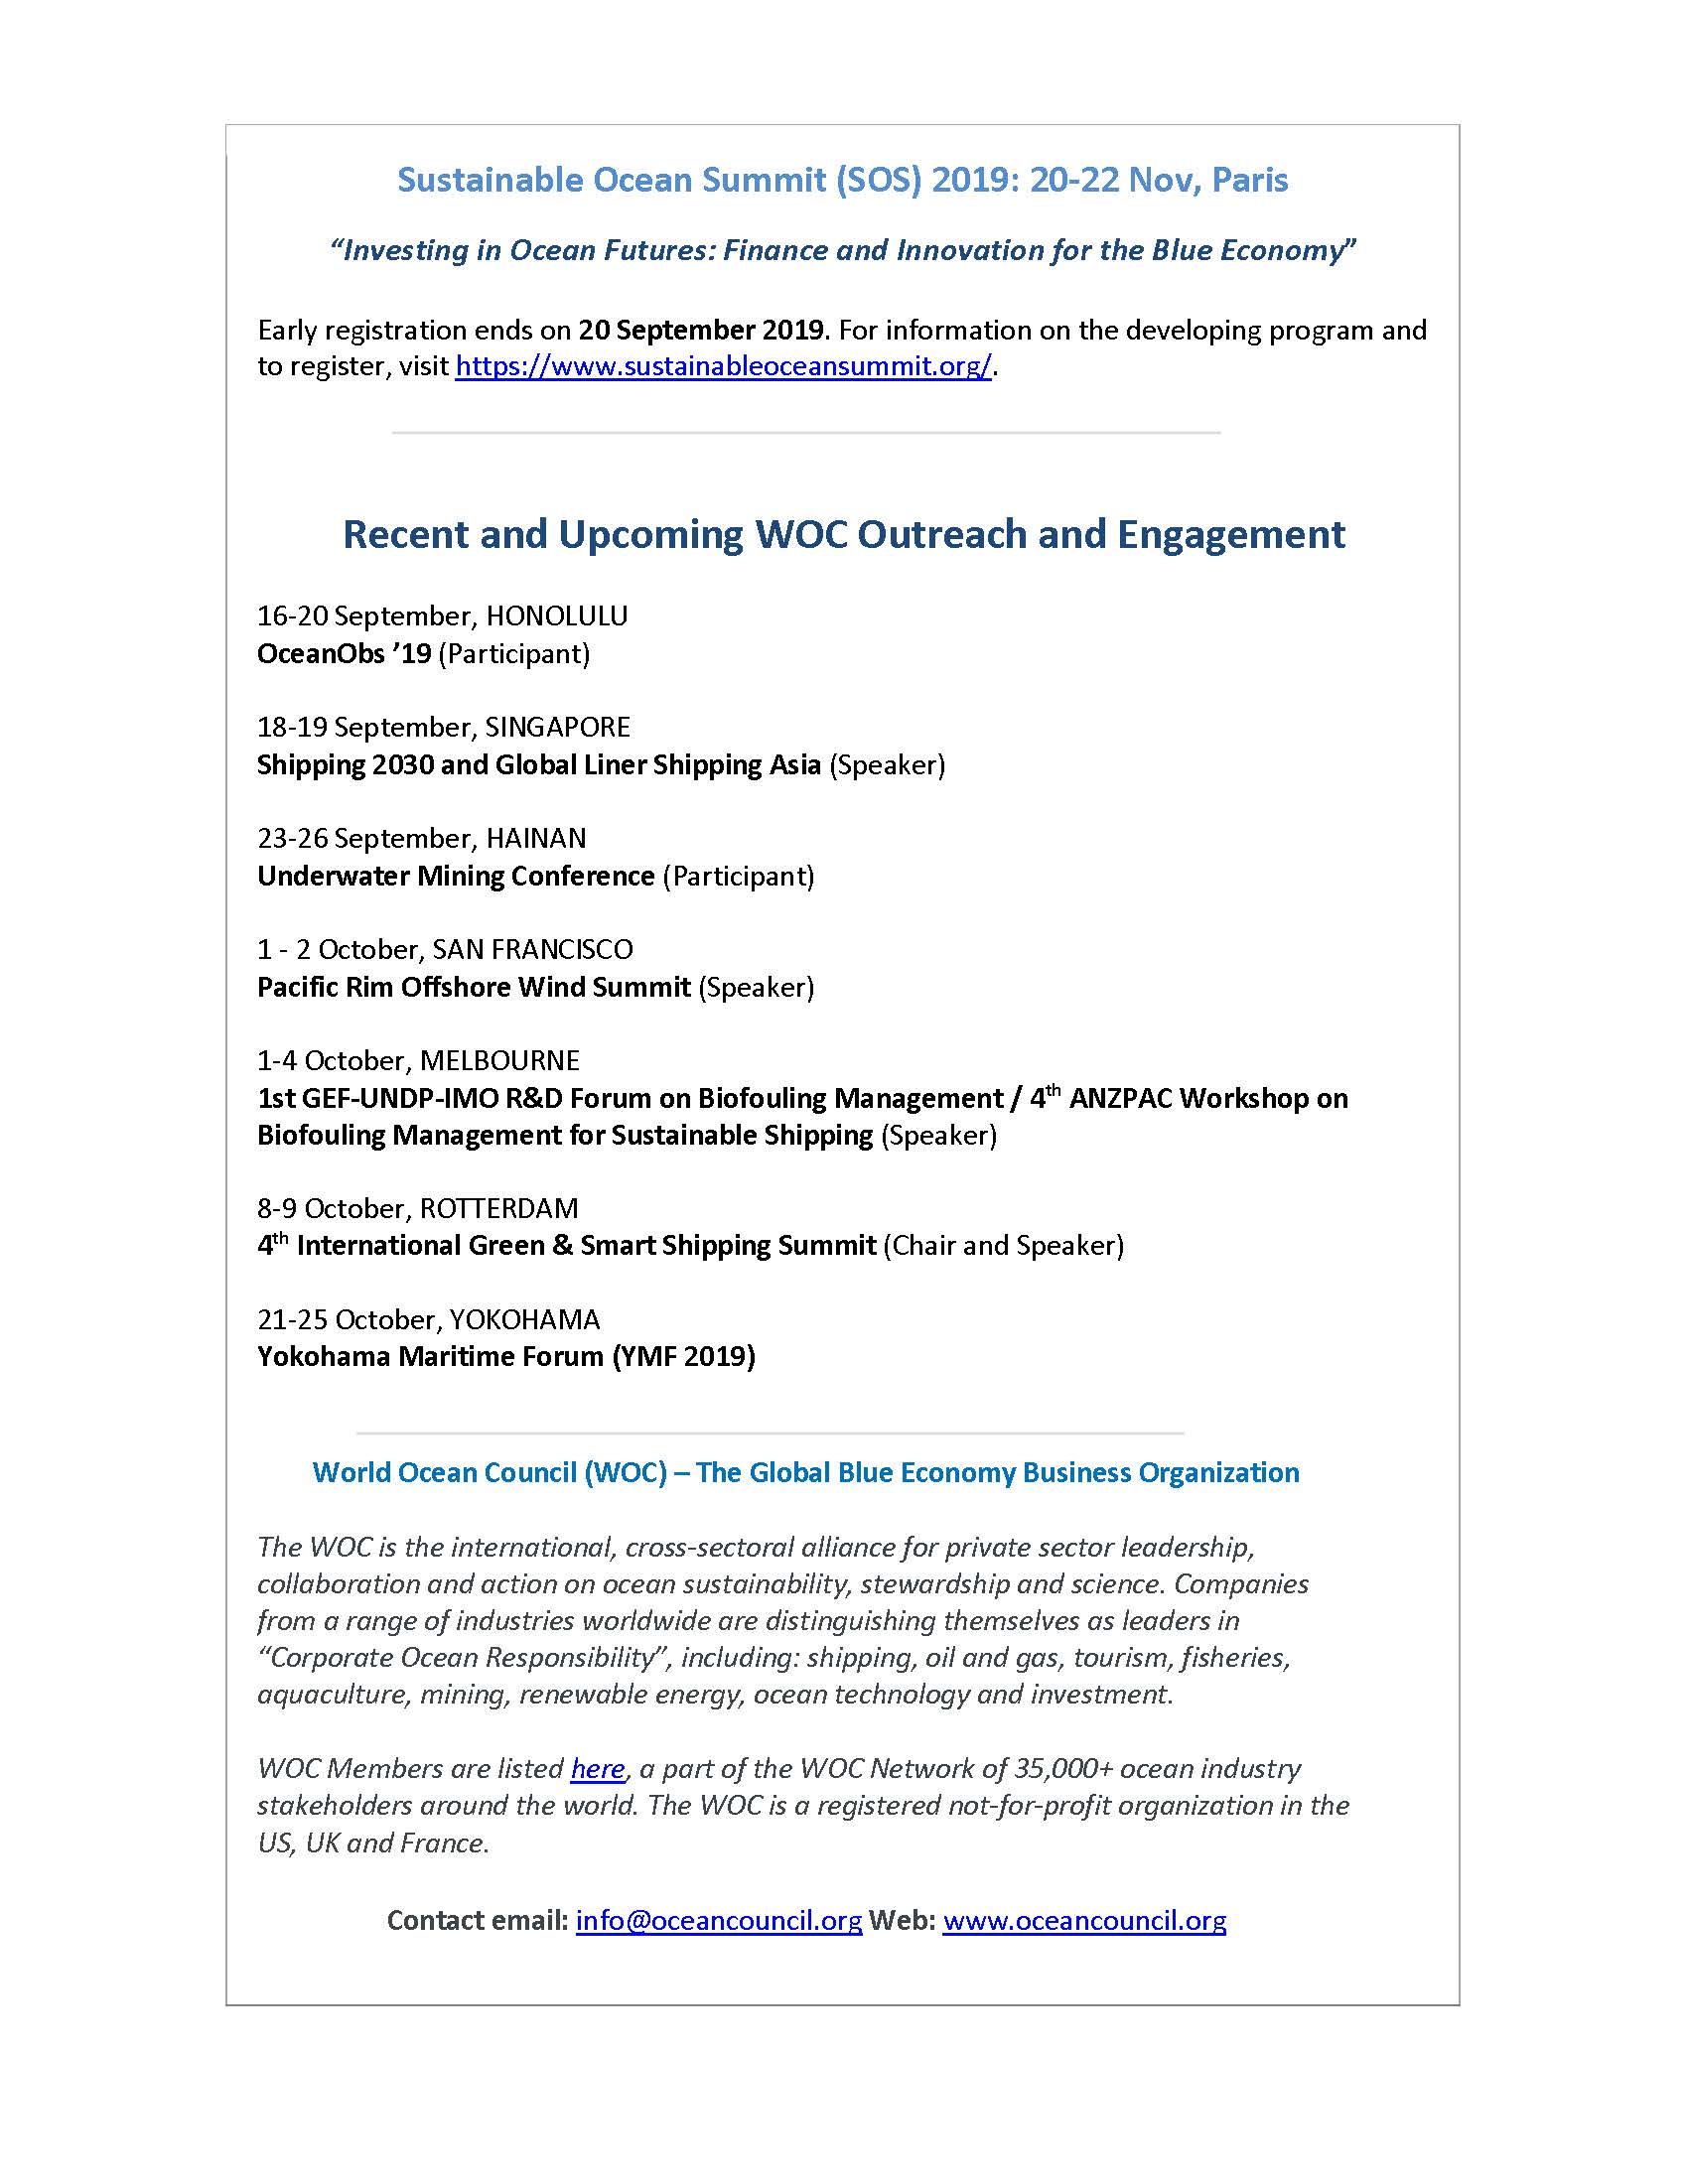 WOC and LNG Marine Fuel Institute Sign MOU - 12 September 2019